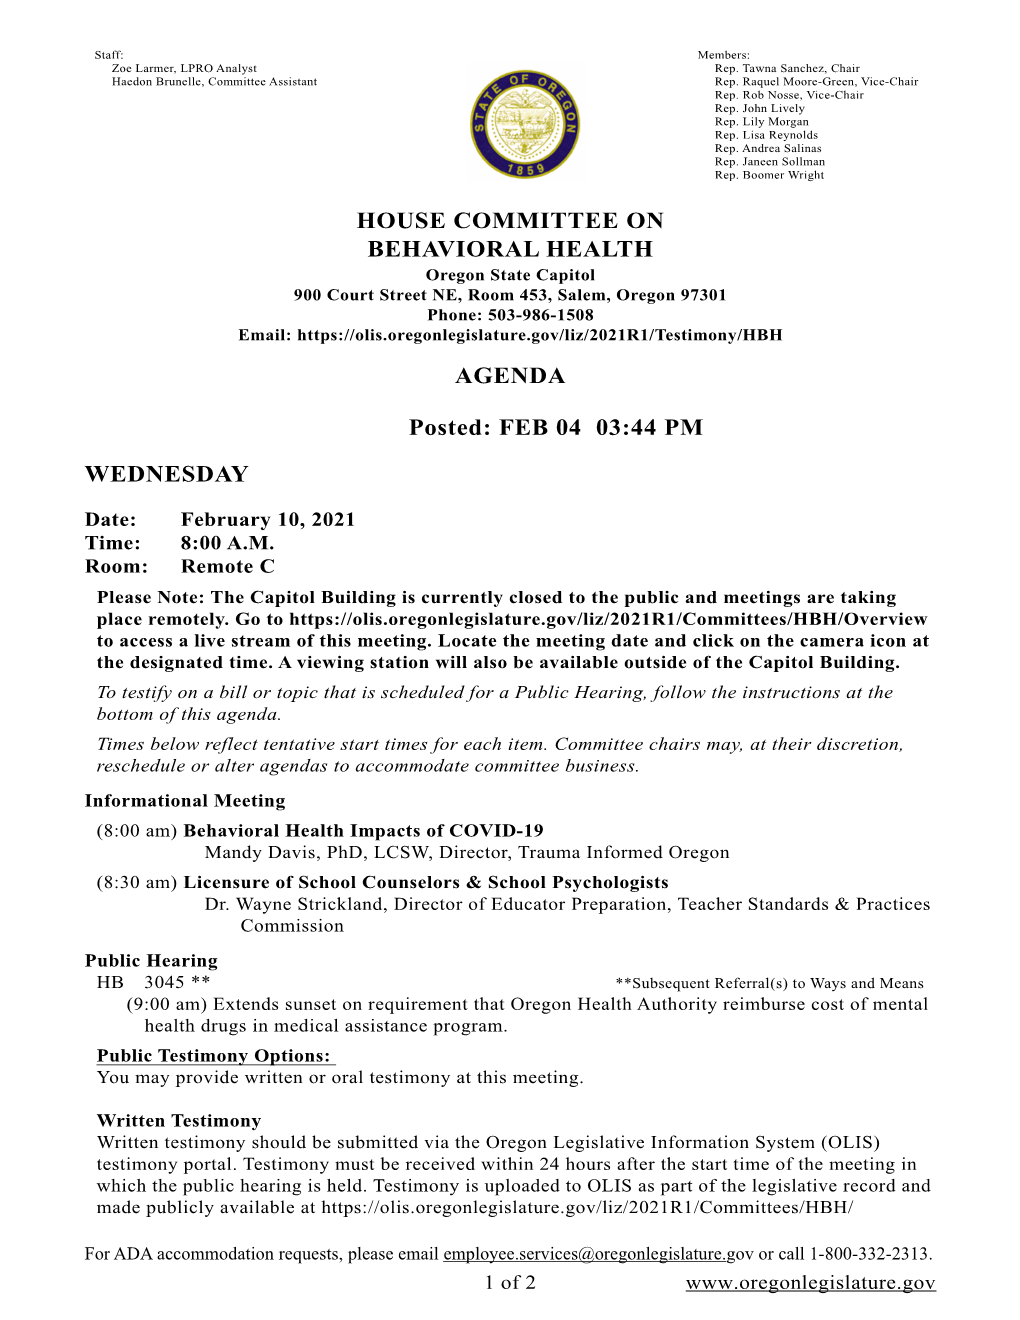 HOUSE COMMITTEE on BEHAVIORAL HEALTH AGENDA Posted